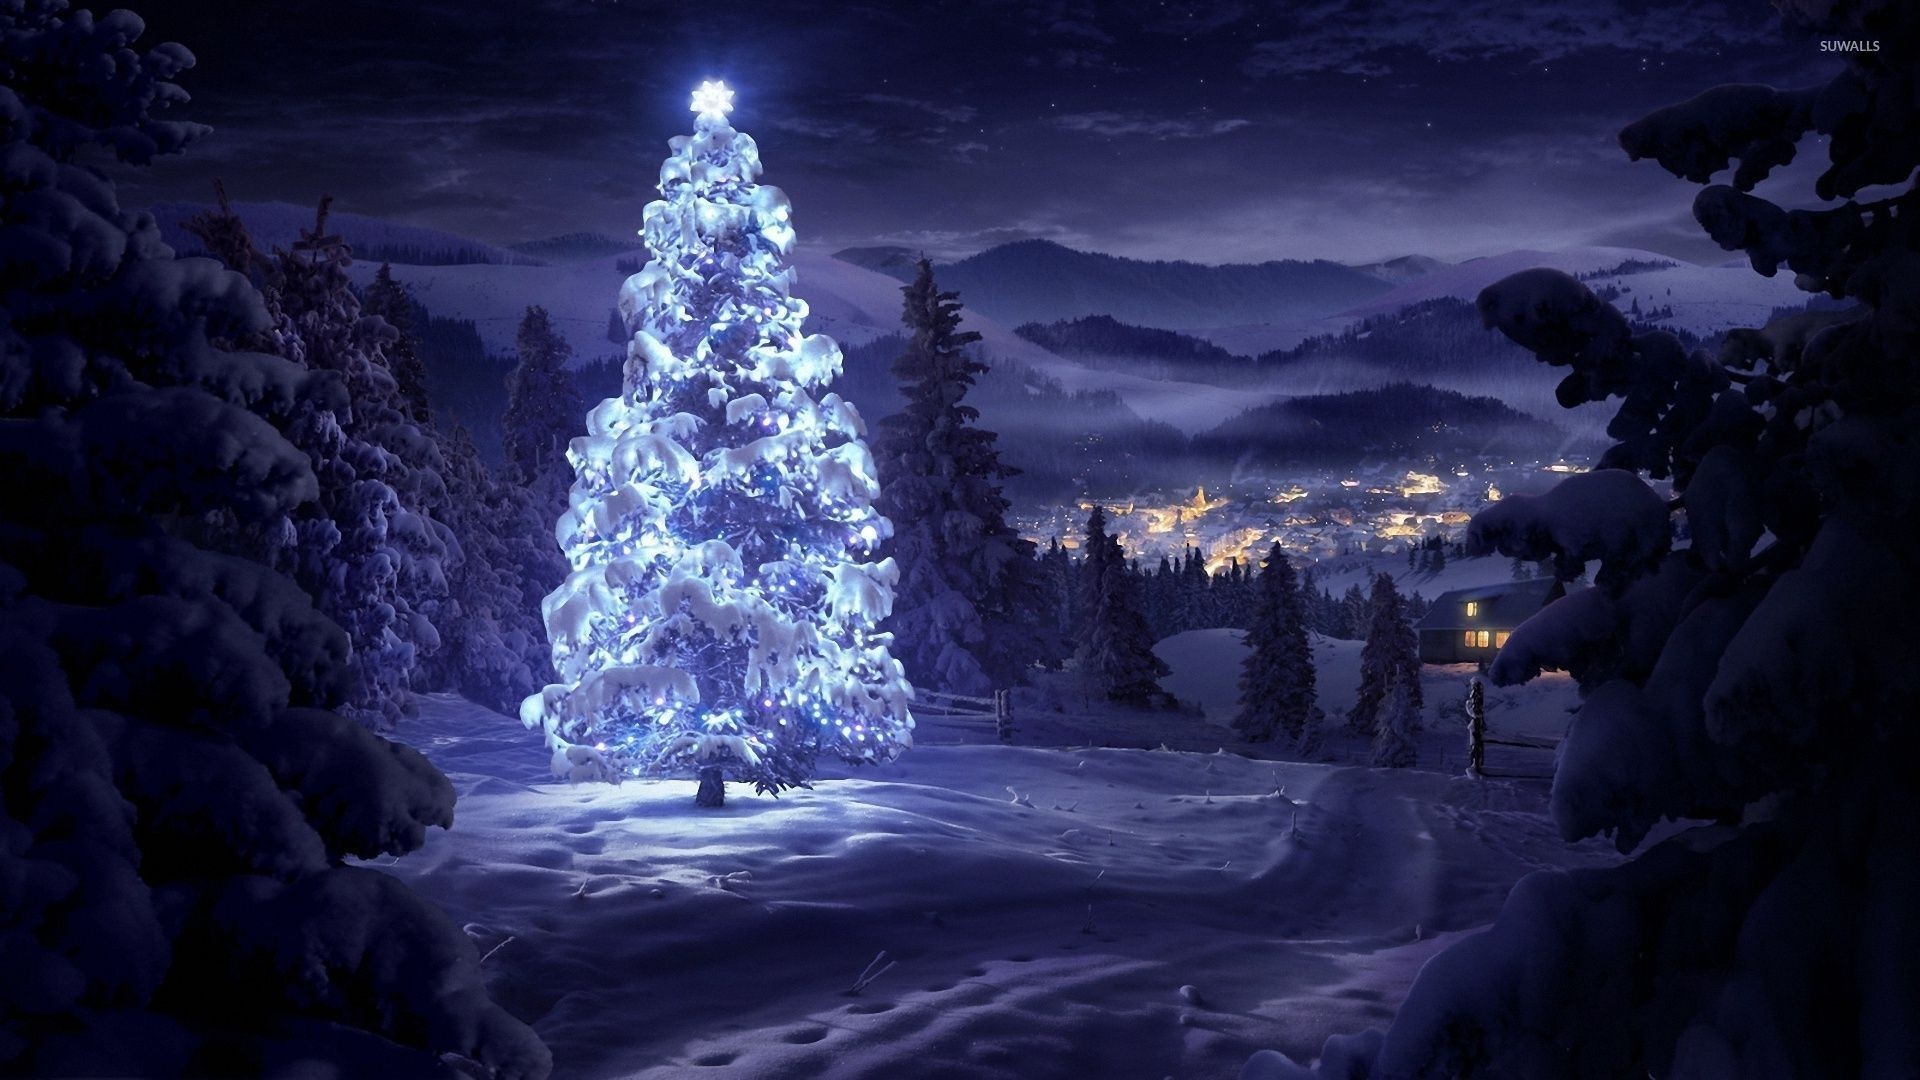 1920x1080  Bright star on top of a beautiful snowy tree in the forest  wallpaper  jpg